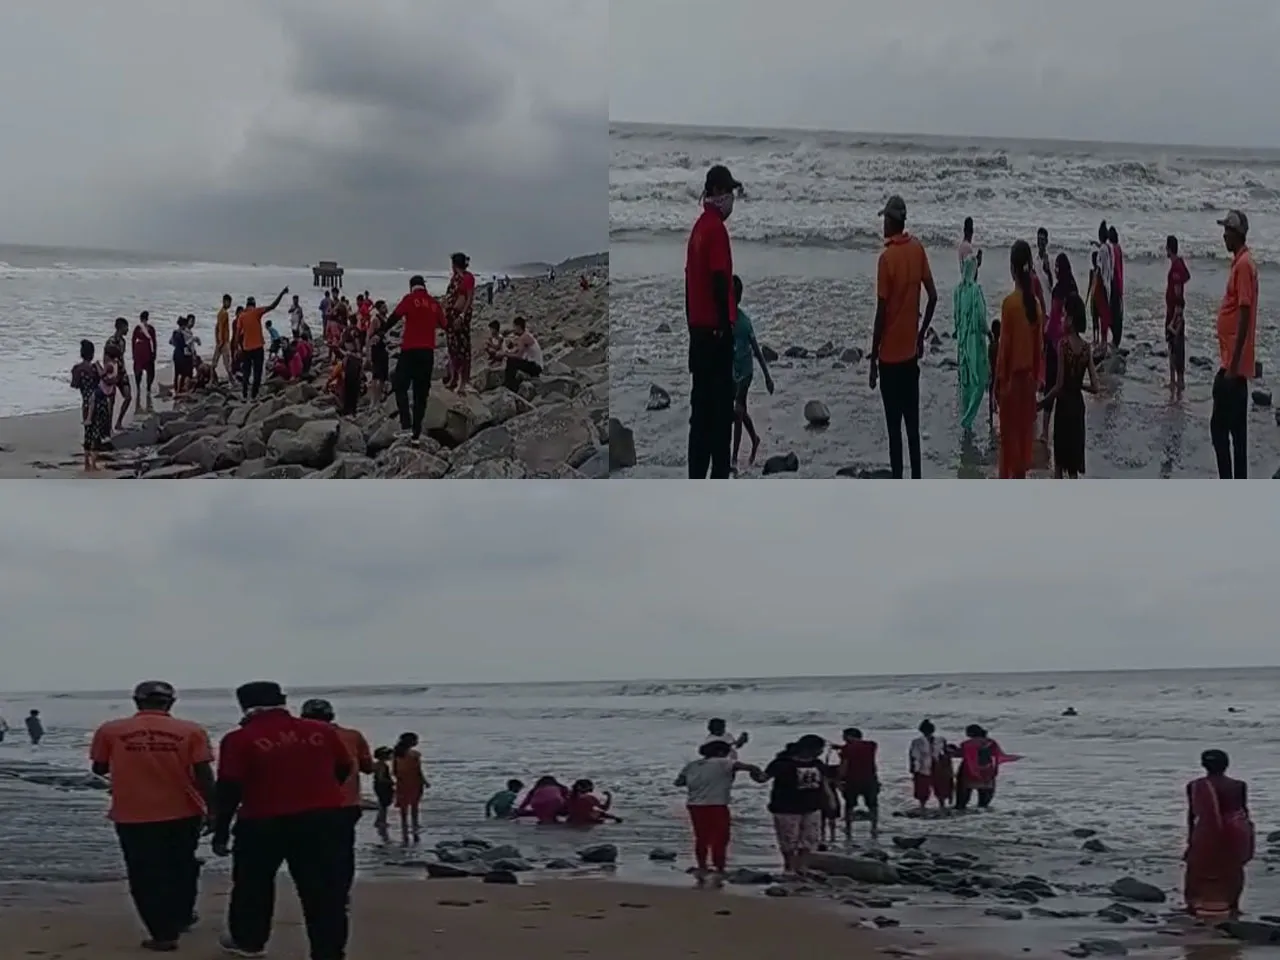 Cyclone Mocha: Barrier to sea bathing! Frustrated tourists